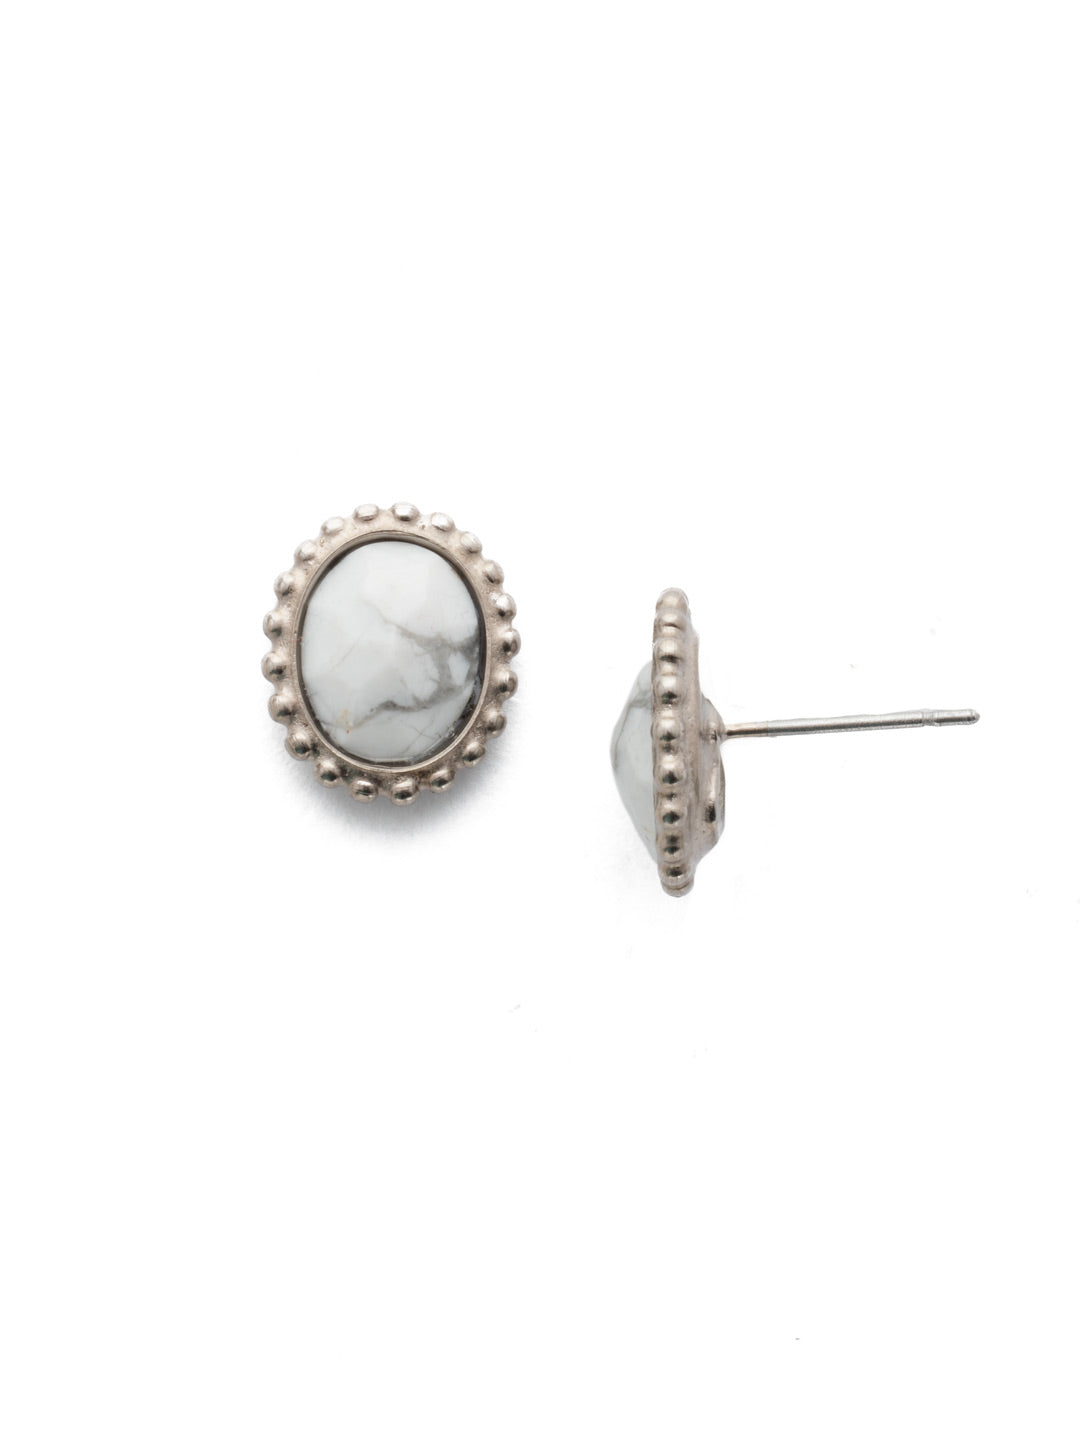 Oval-Cut Solitaire Stud Earrings - EDQ10ASGLC - These simple stud earrings feature a beautiful oval crystal surrounded by a decorative edged border. From Sorrelli's Glacier collection in our Antique Silver-tone finish.